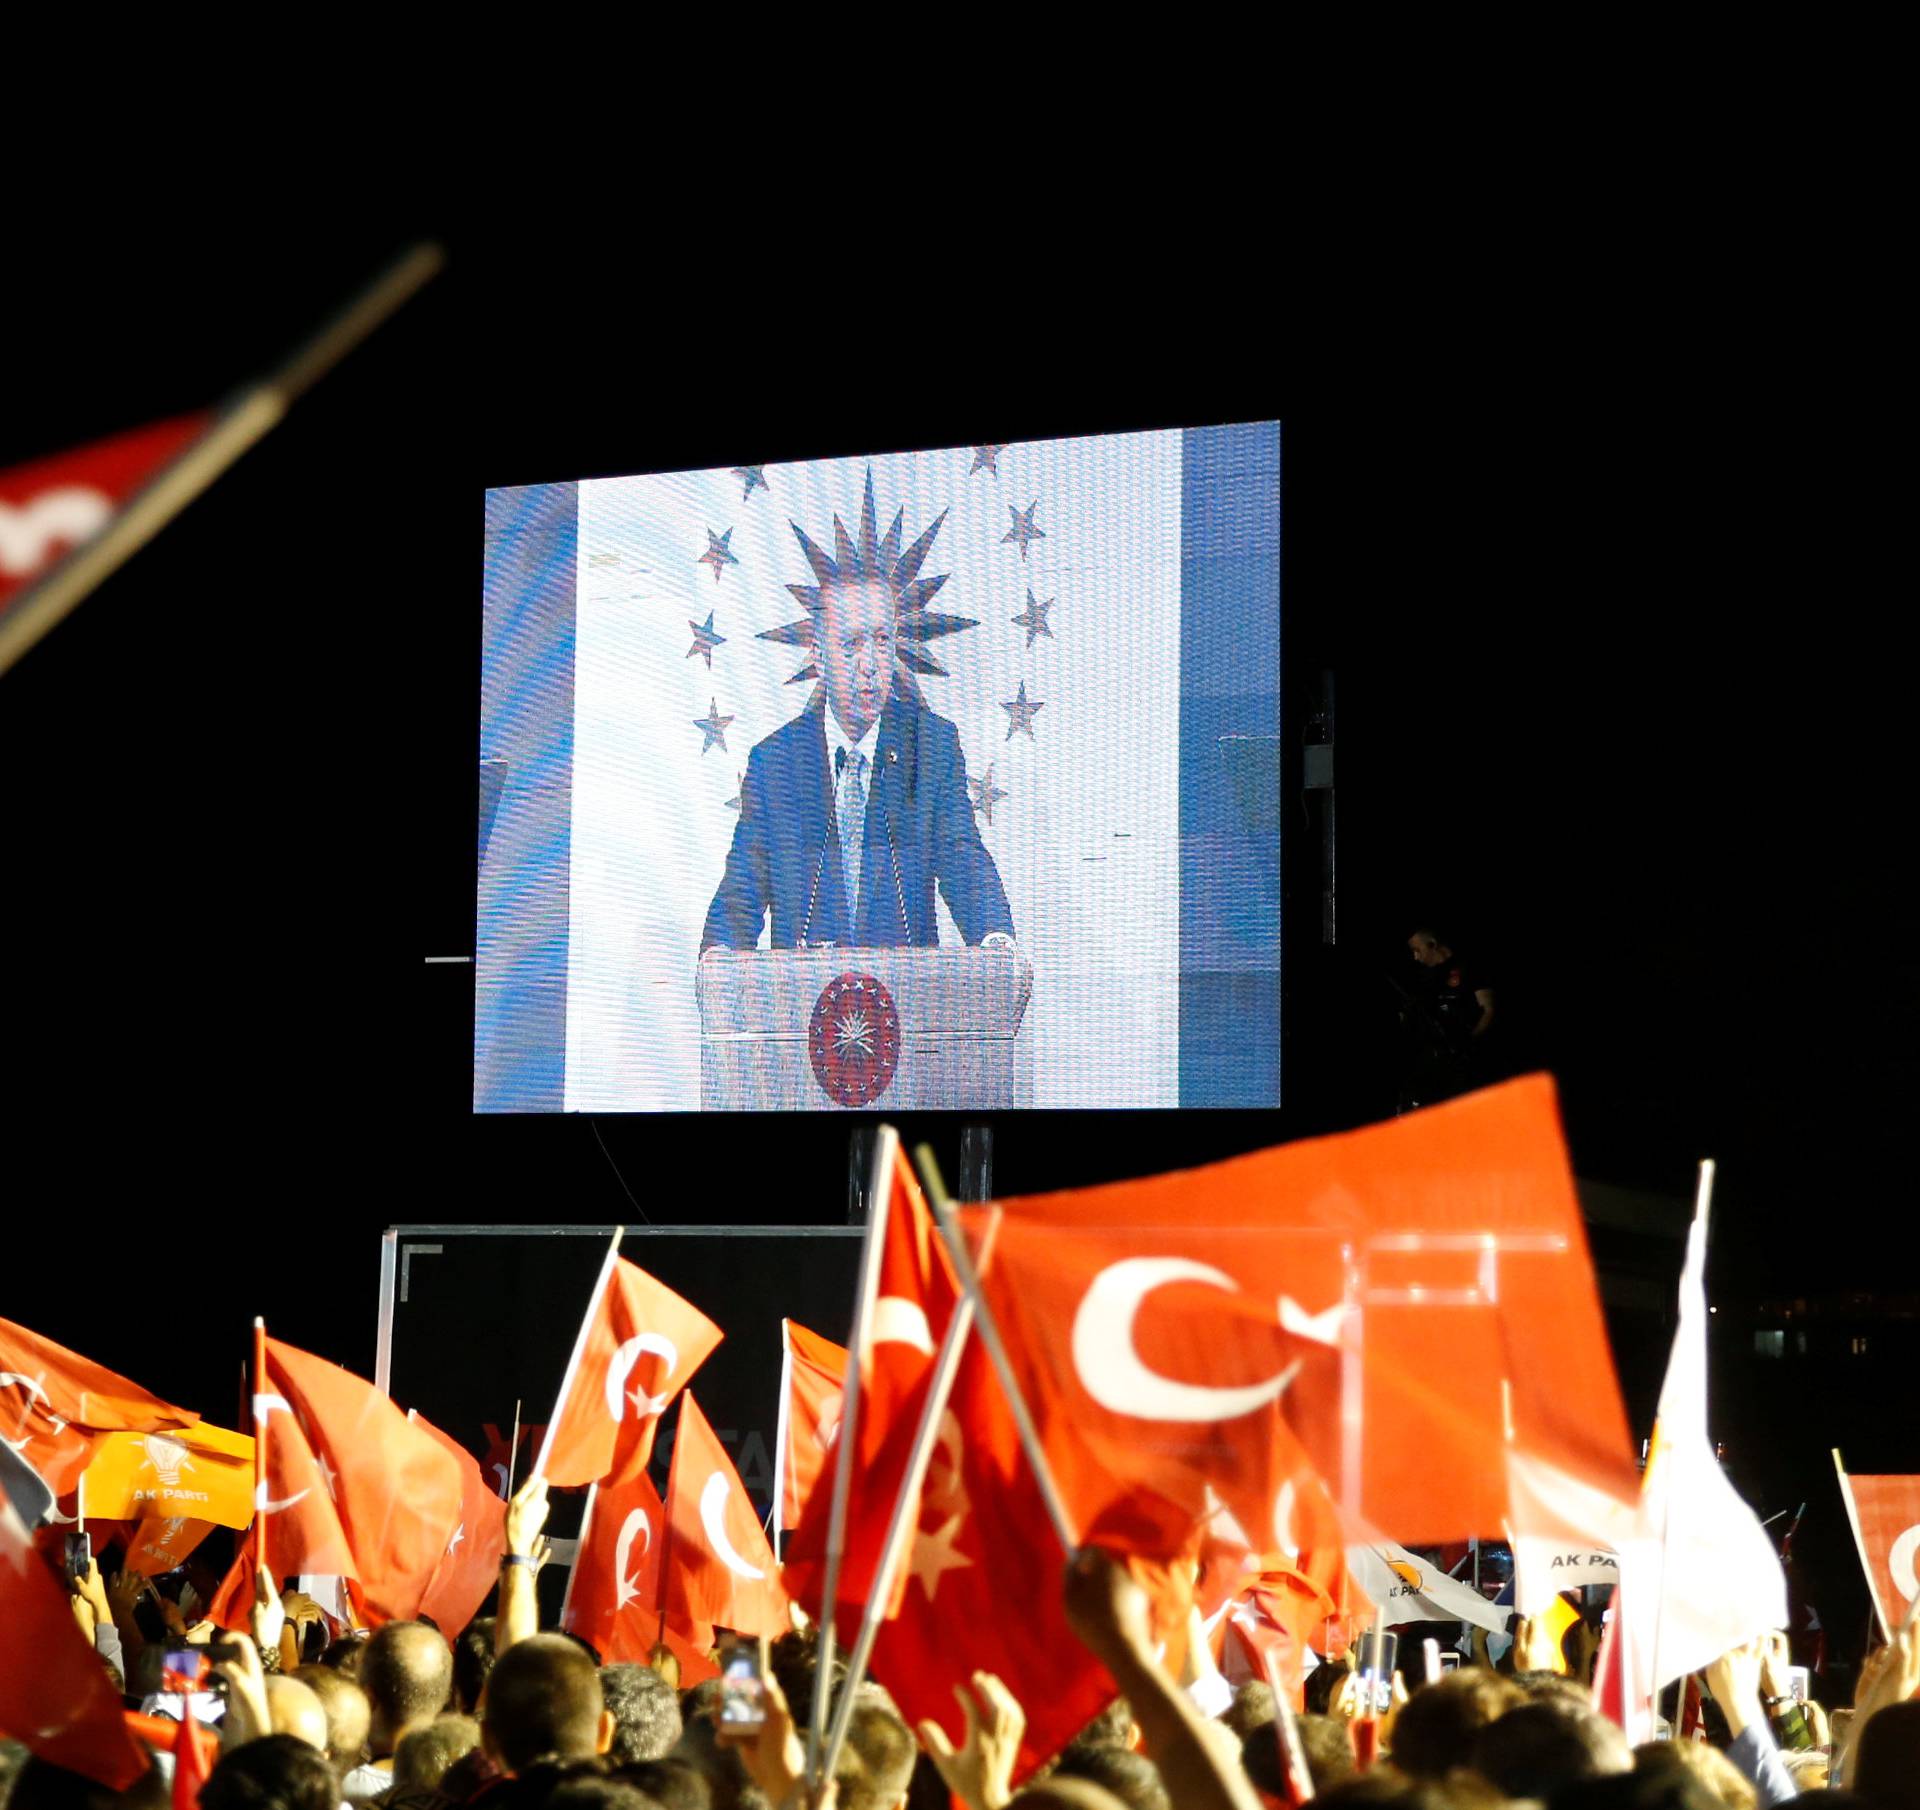 Turkish President Tayyip Erdogan is seen on the screen as he addresses his supporters in Istanbul